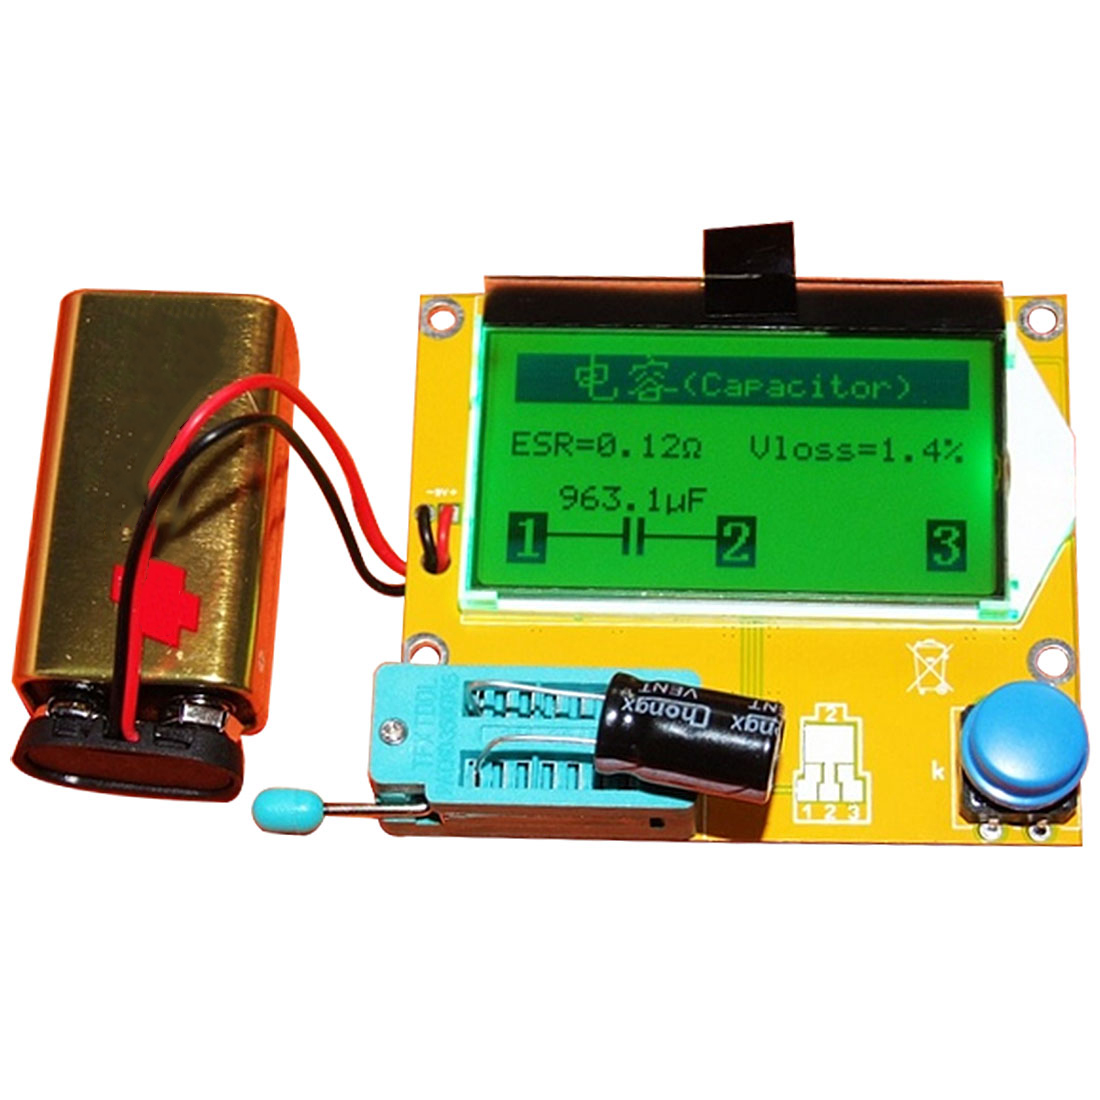 All-in-1 LCR Component Tester Transistor Diode CapacitanceESR Meter InductaPLCA 